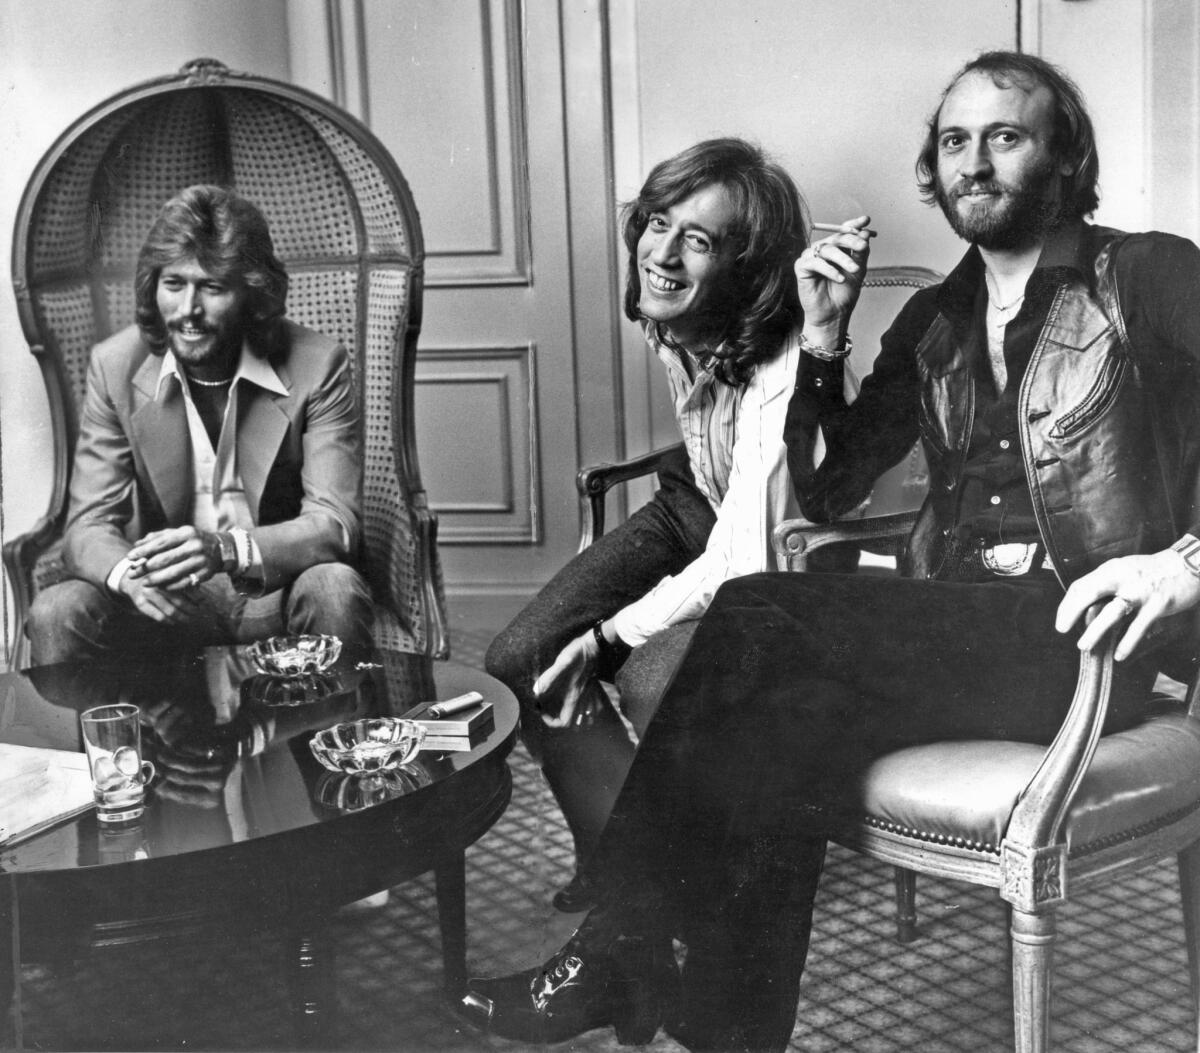 The Bee Gees -- Barry, left, Robin and Maurice Gibb -- were riding high off the success of their blockbuster hit soundtrack album "Saturday Night Fever" when this L.A. Times file photo was shot in 1979.